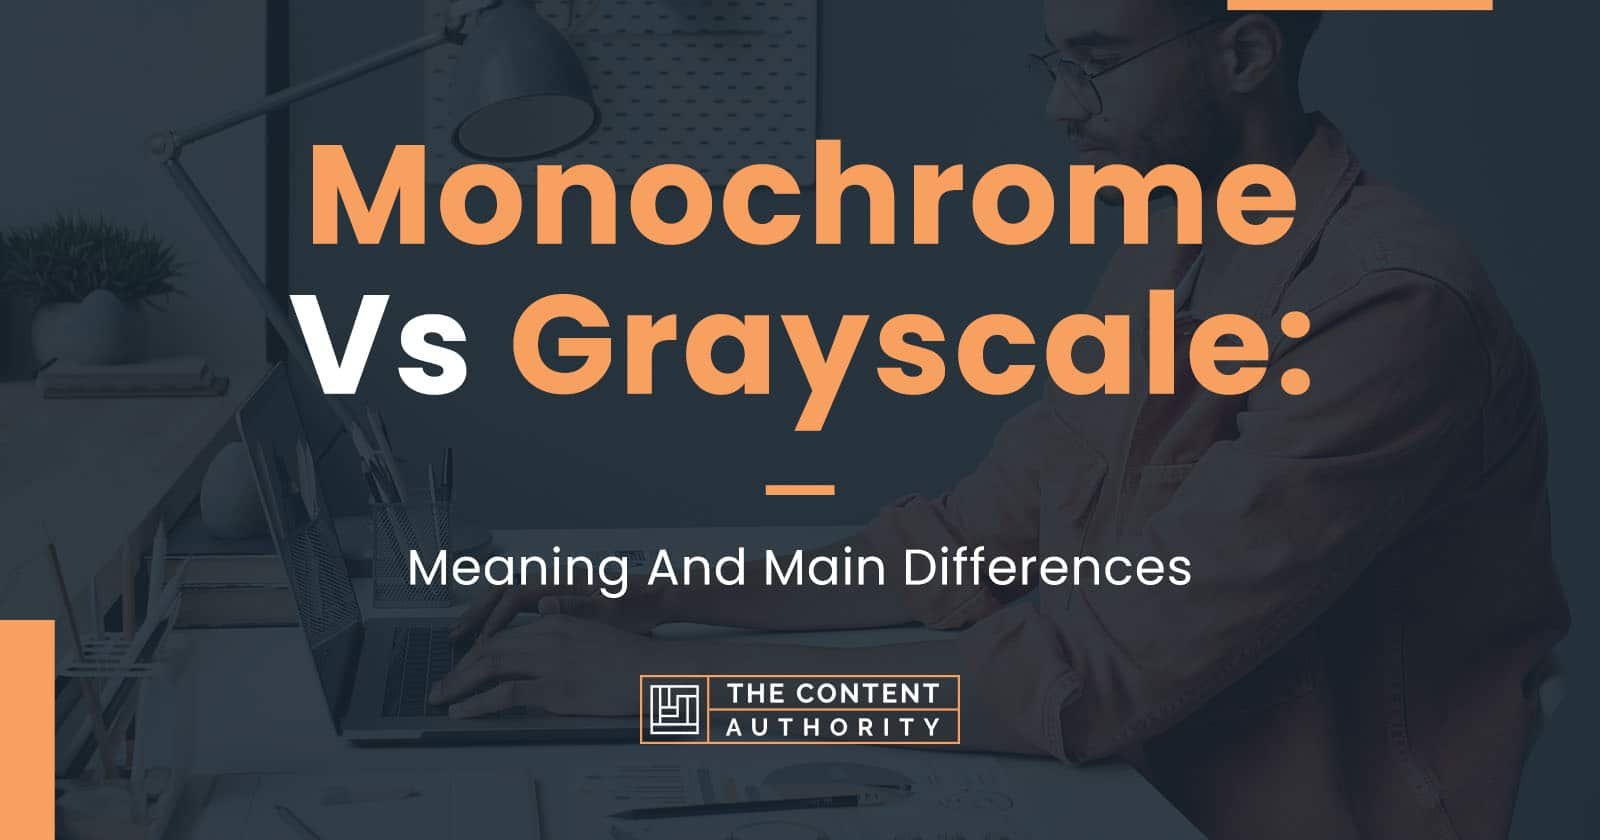 monochrome-vs-grayscale-meaning-and-main-differences